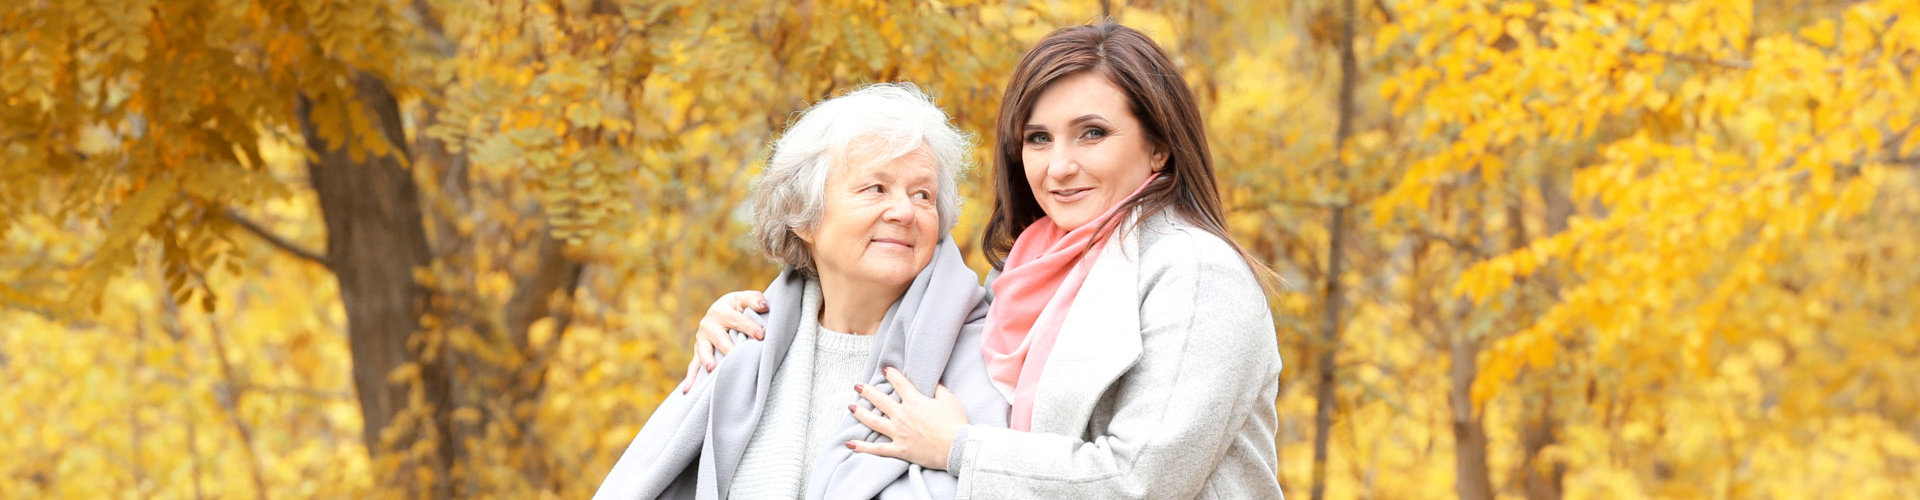 lady caregiver with senior woman smiling